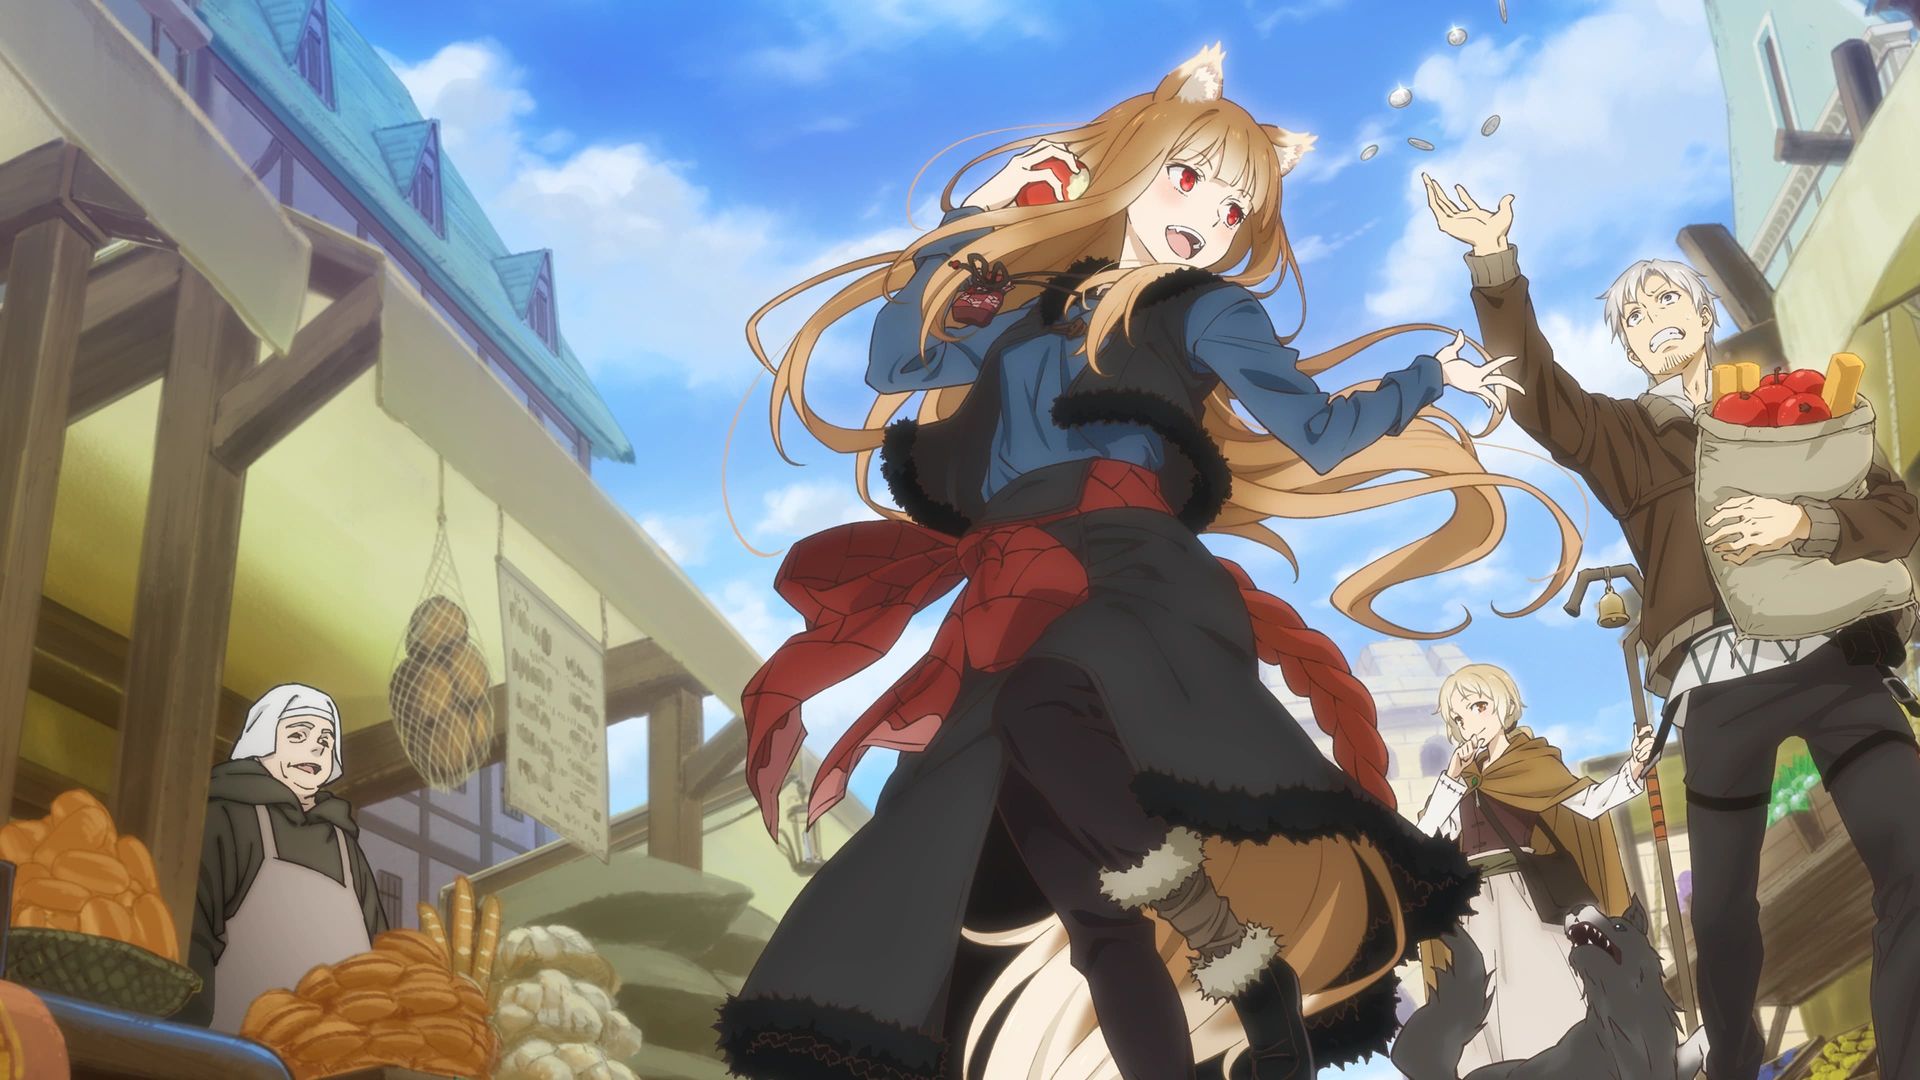 Spice and Wolf: Merchant Meets the Wise Wolf background